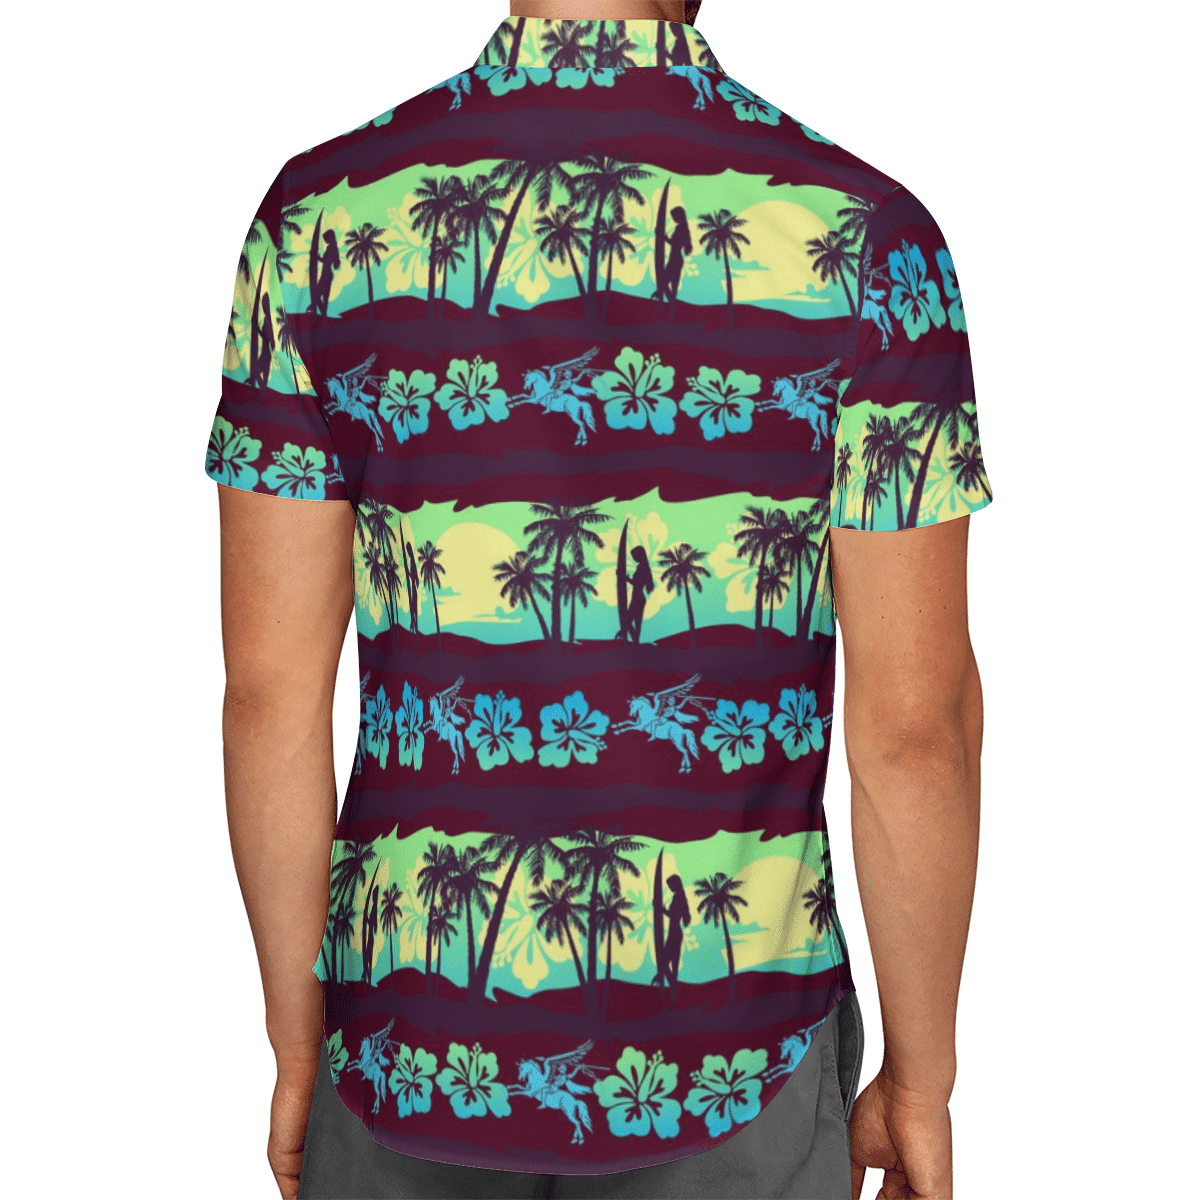 Going to the beach with a quality shirt 167